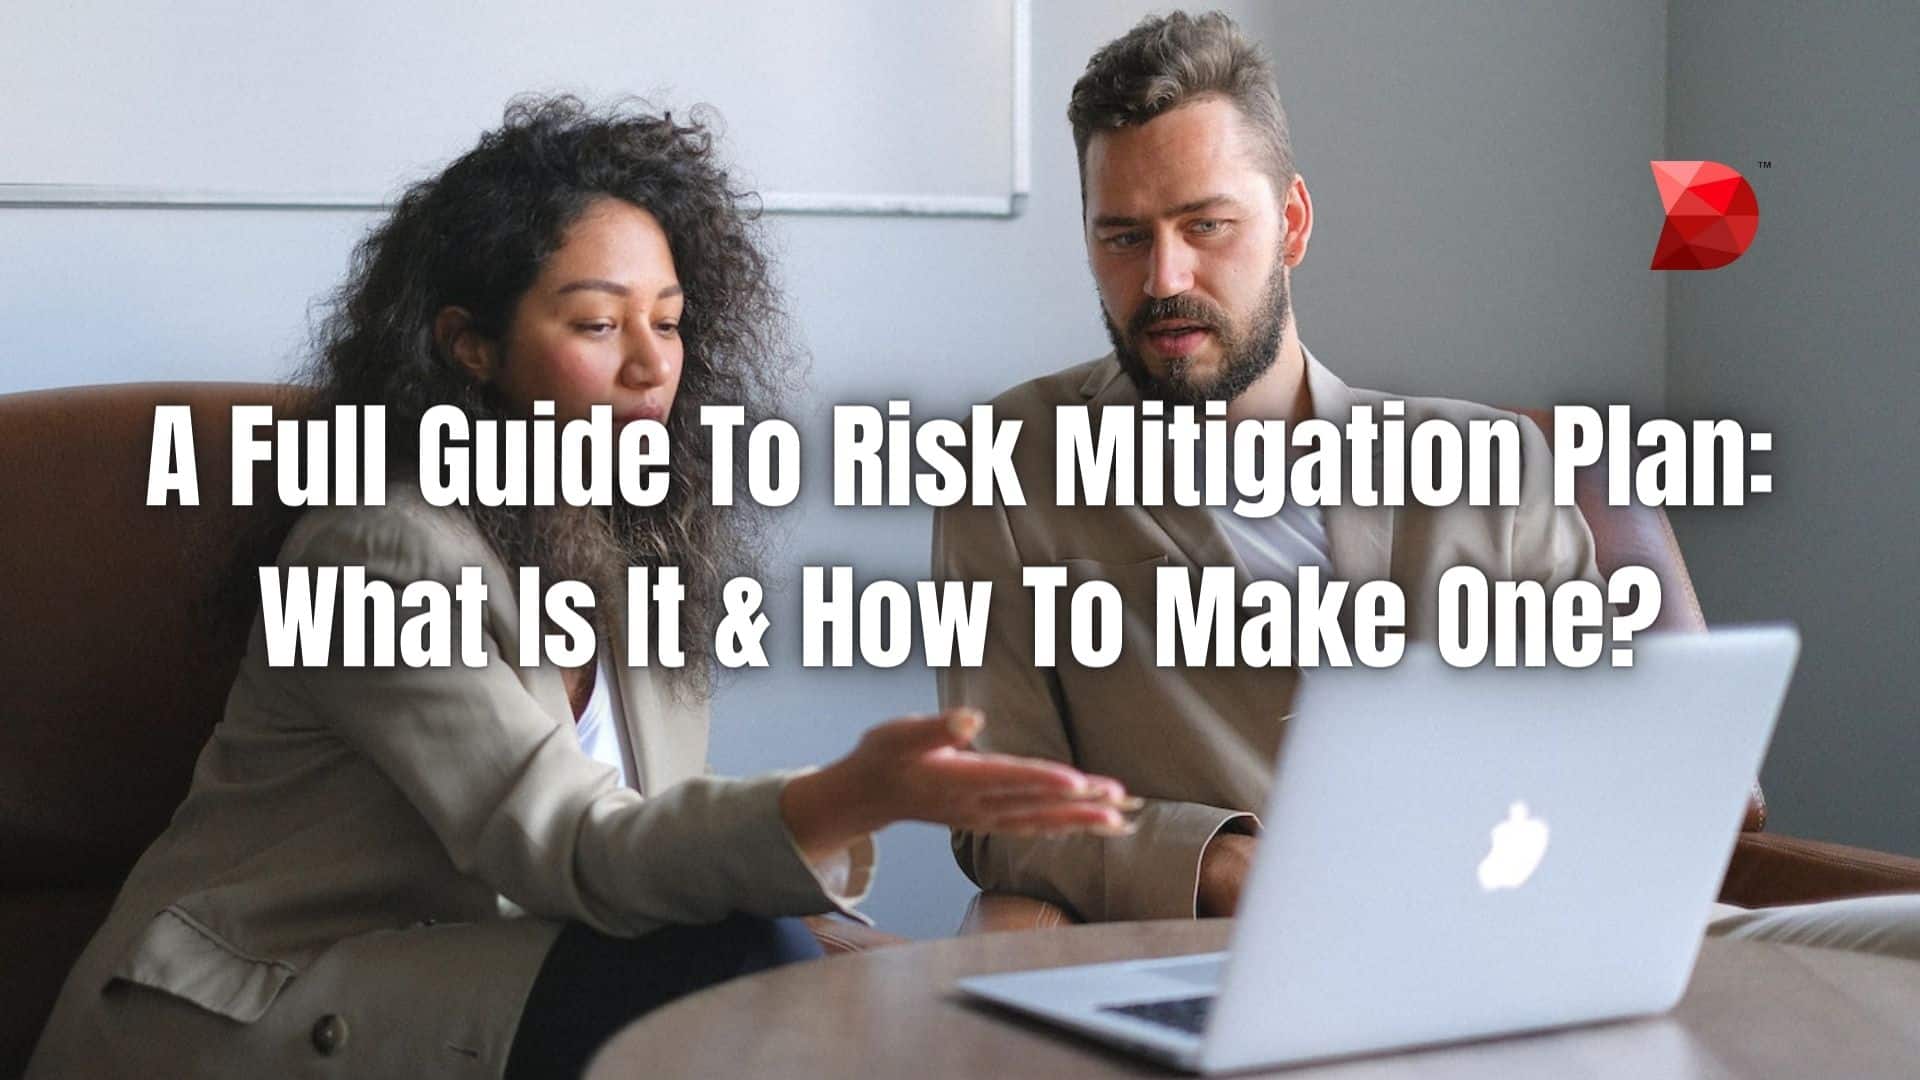 A Full Guide To Risk Mitigation Plan What Is It & How To Make One